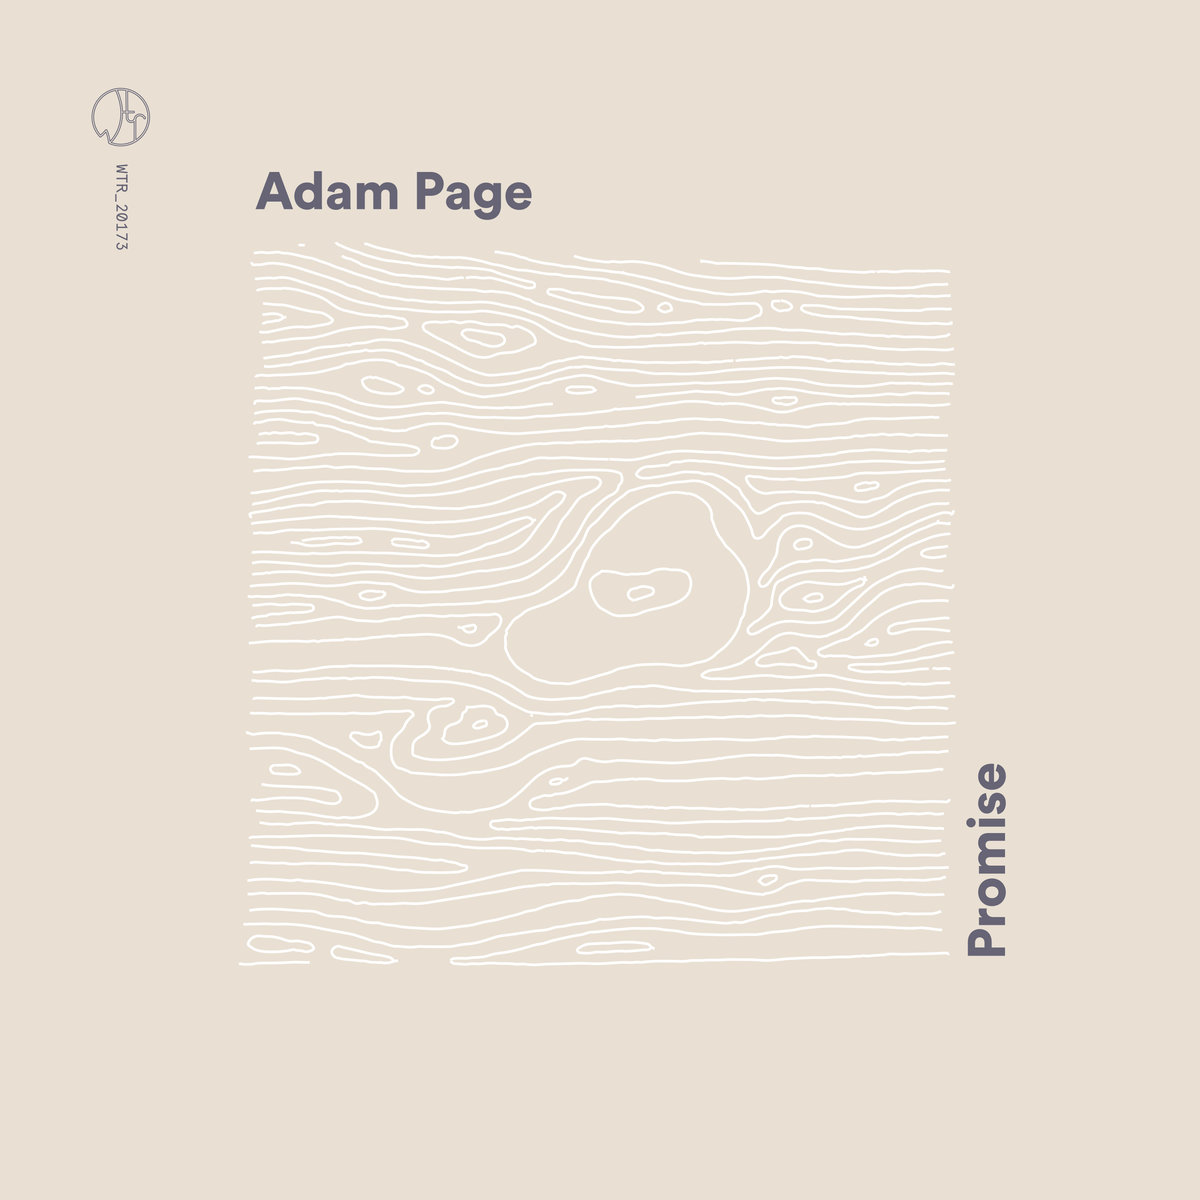 Adam Page – “Promise” [Recorded, Mixed & Mastered (JB), Produced (AP), WTR]